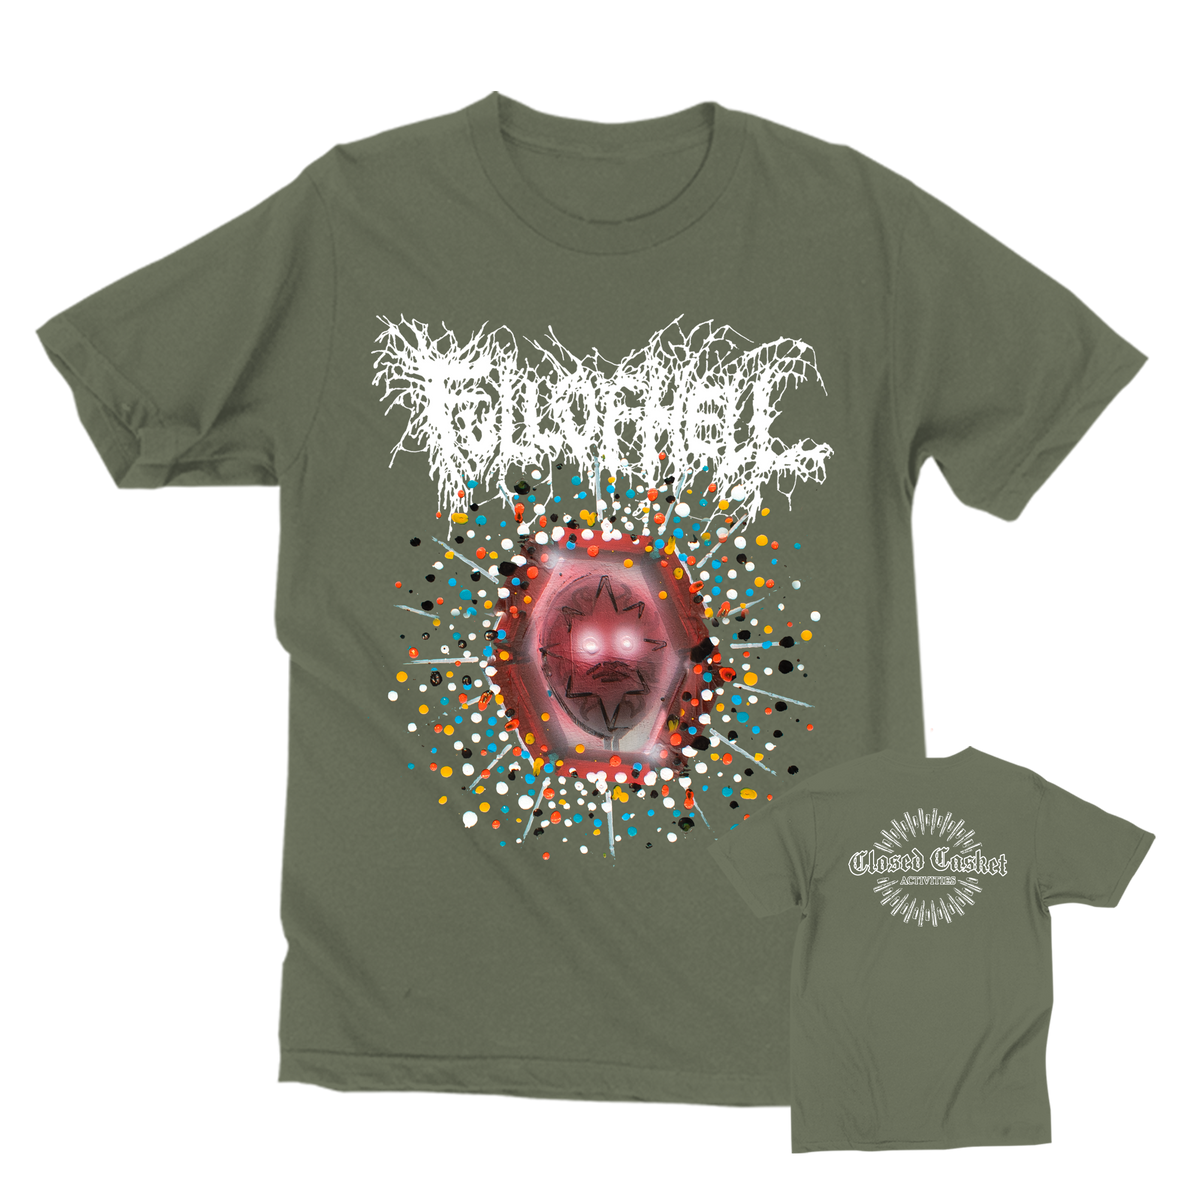 Full of Hell - Gasping Dust T-Shirt